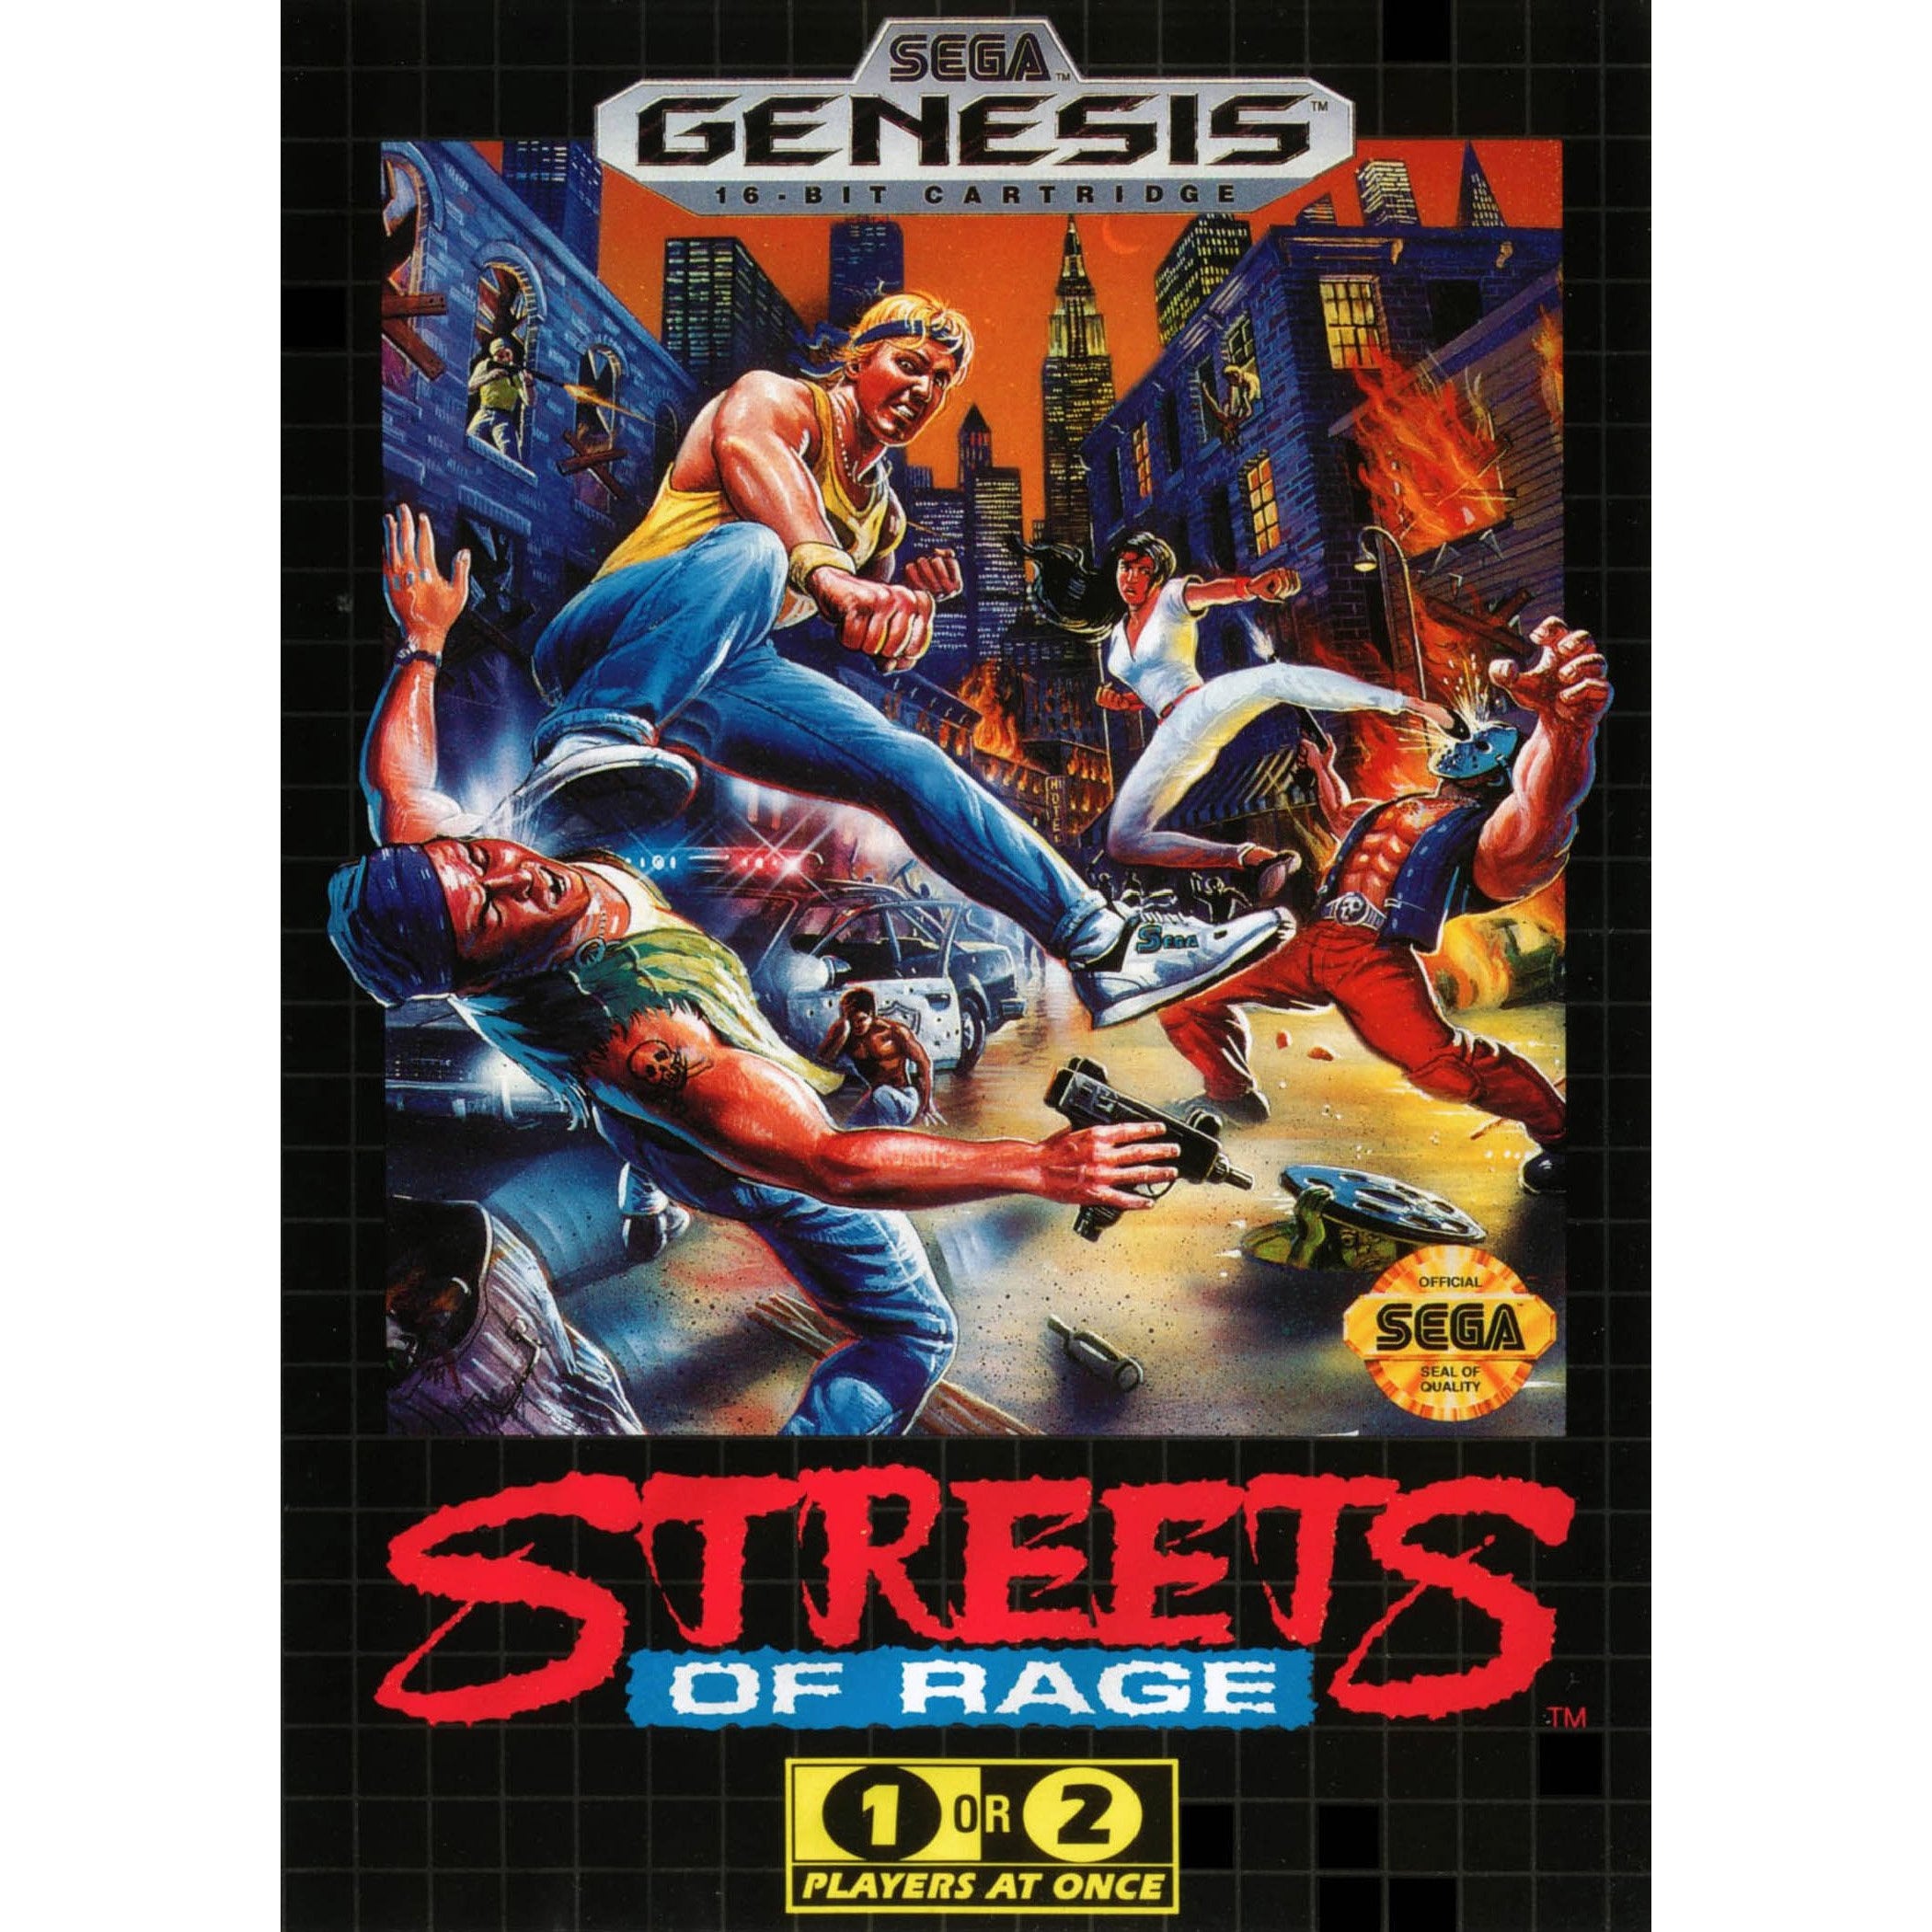 Streets of Rage - Sega Genesis Game Complete - YourGamingShop.com - Buy, Sell, Trade Video Games Online. 120 Day Warranty. Satisfaction Guaranteed.